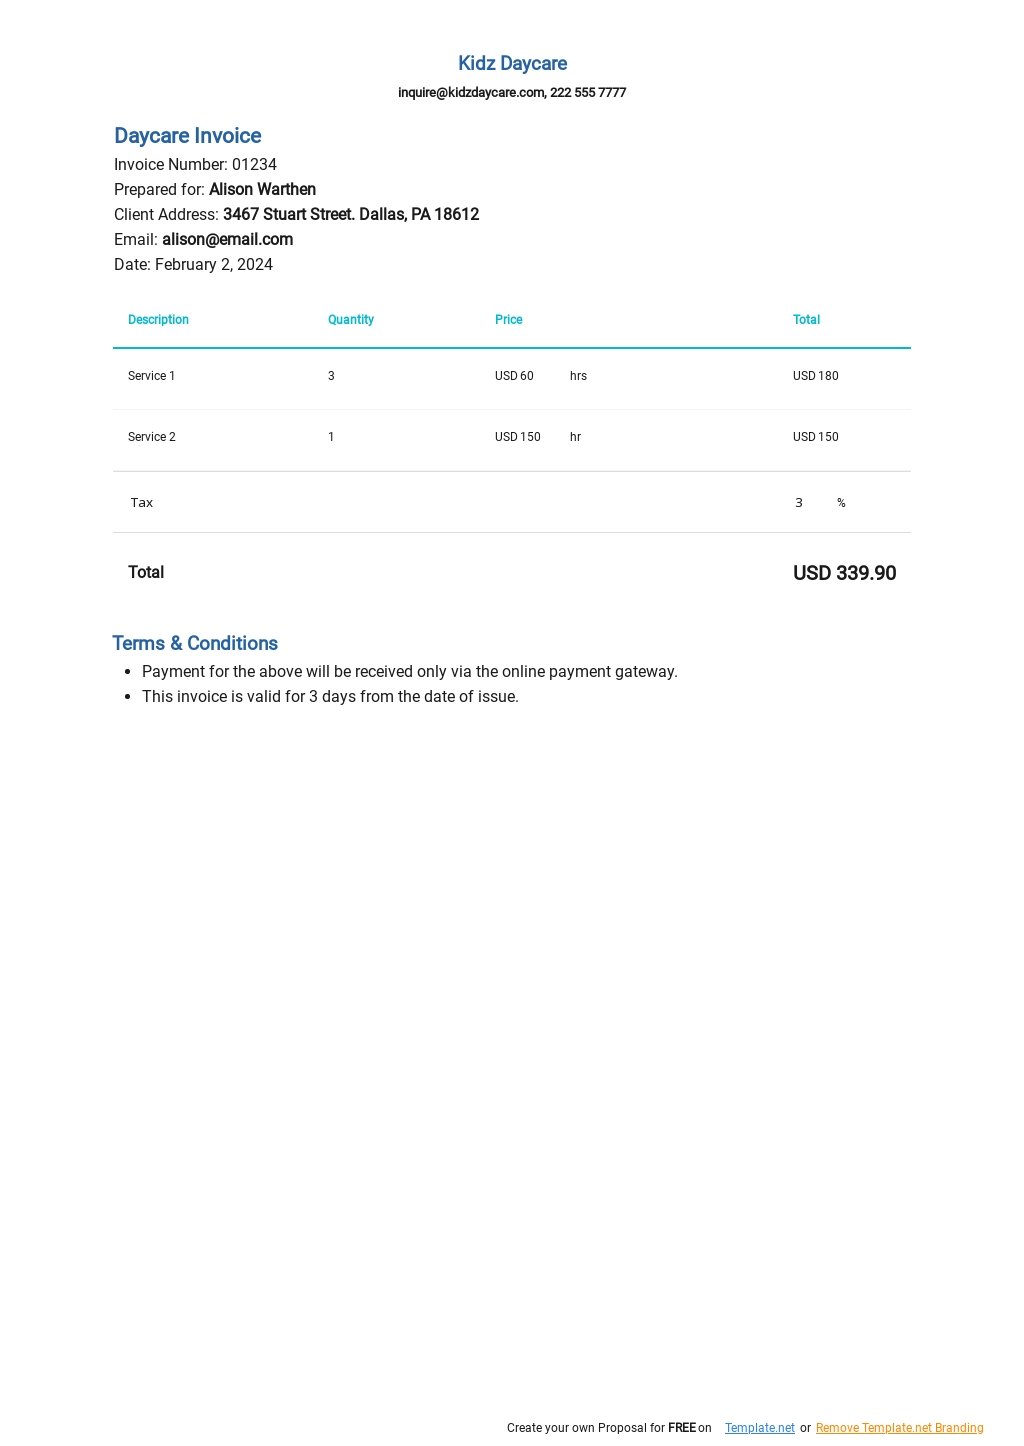 Daycare Invoice Template [Free PDF] Google Docs, Google Sheets, Excel